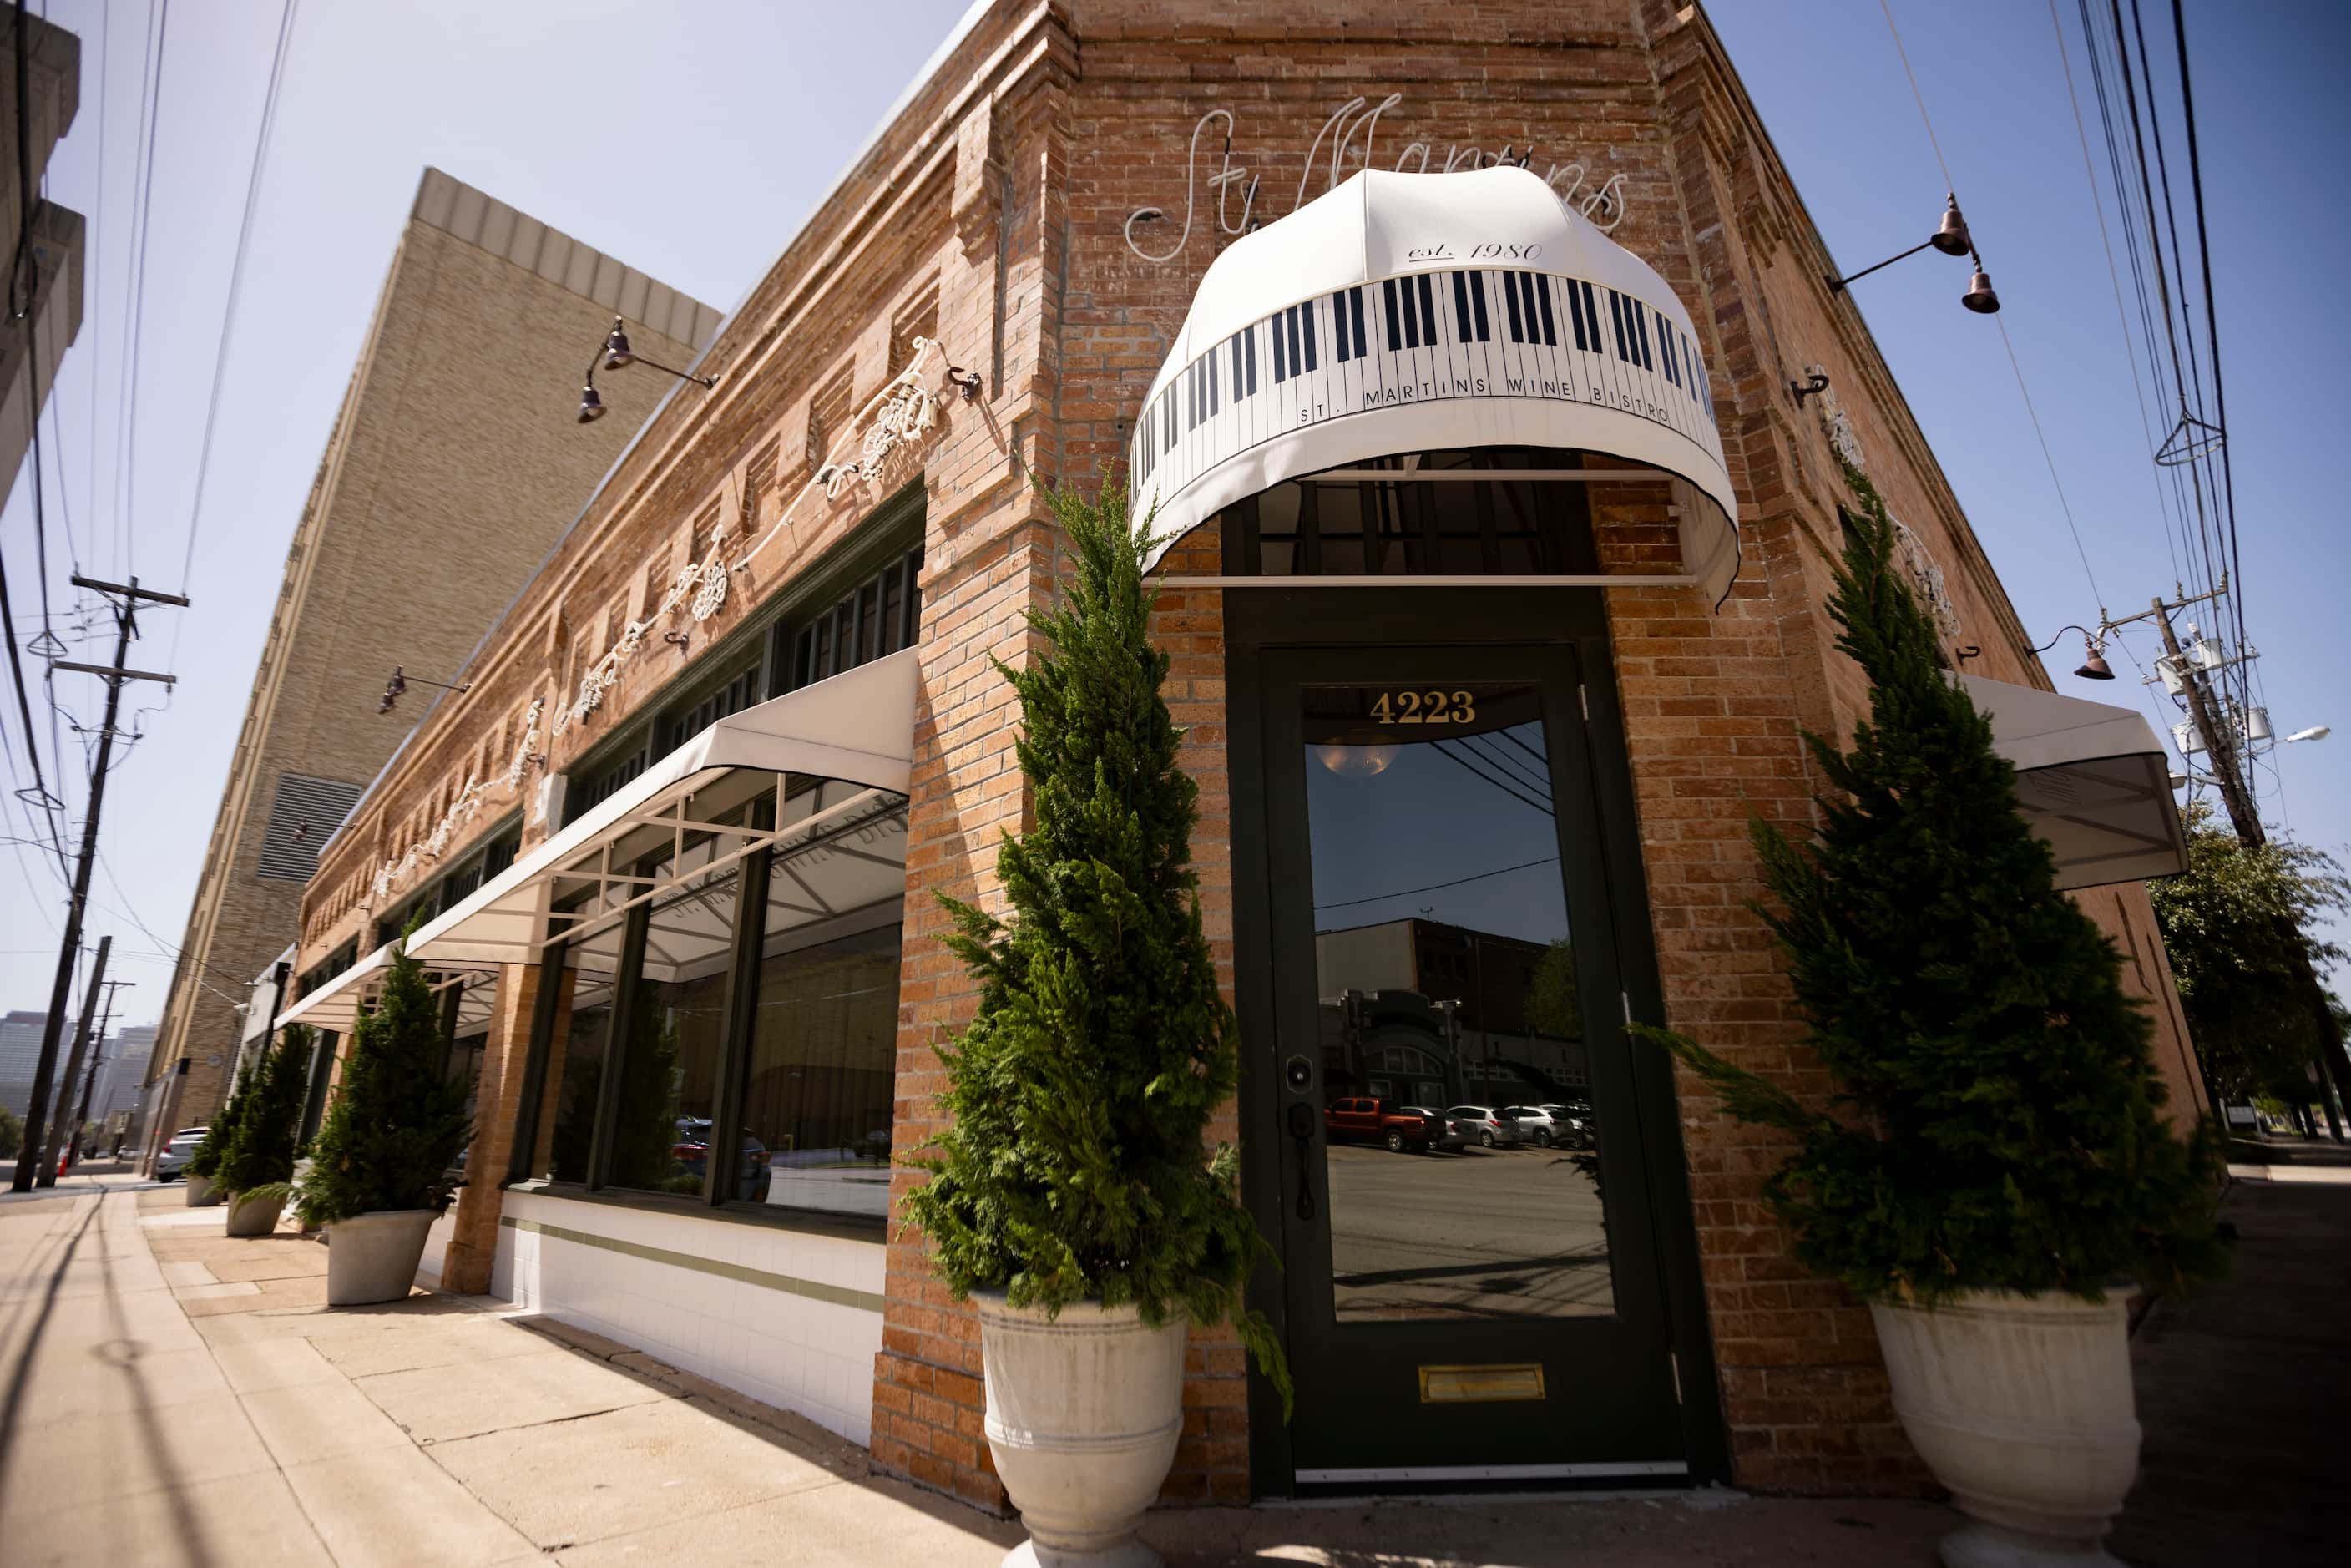 Customers enter St. Martin's Wine Bistro on the corner. You can't miss the piano-key awning.